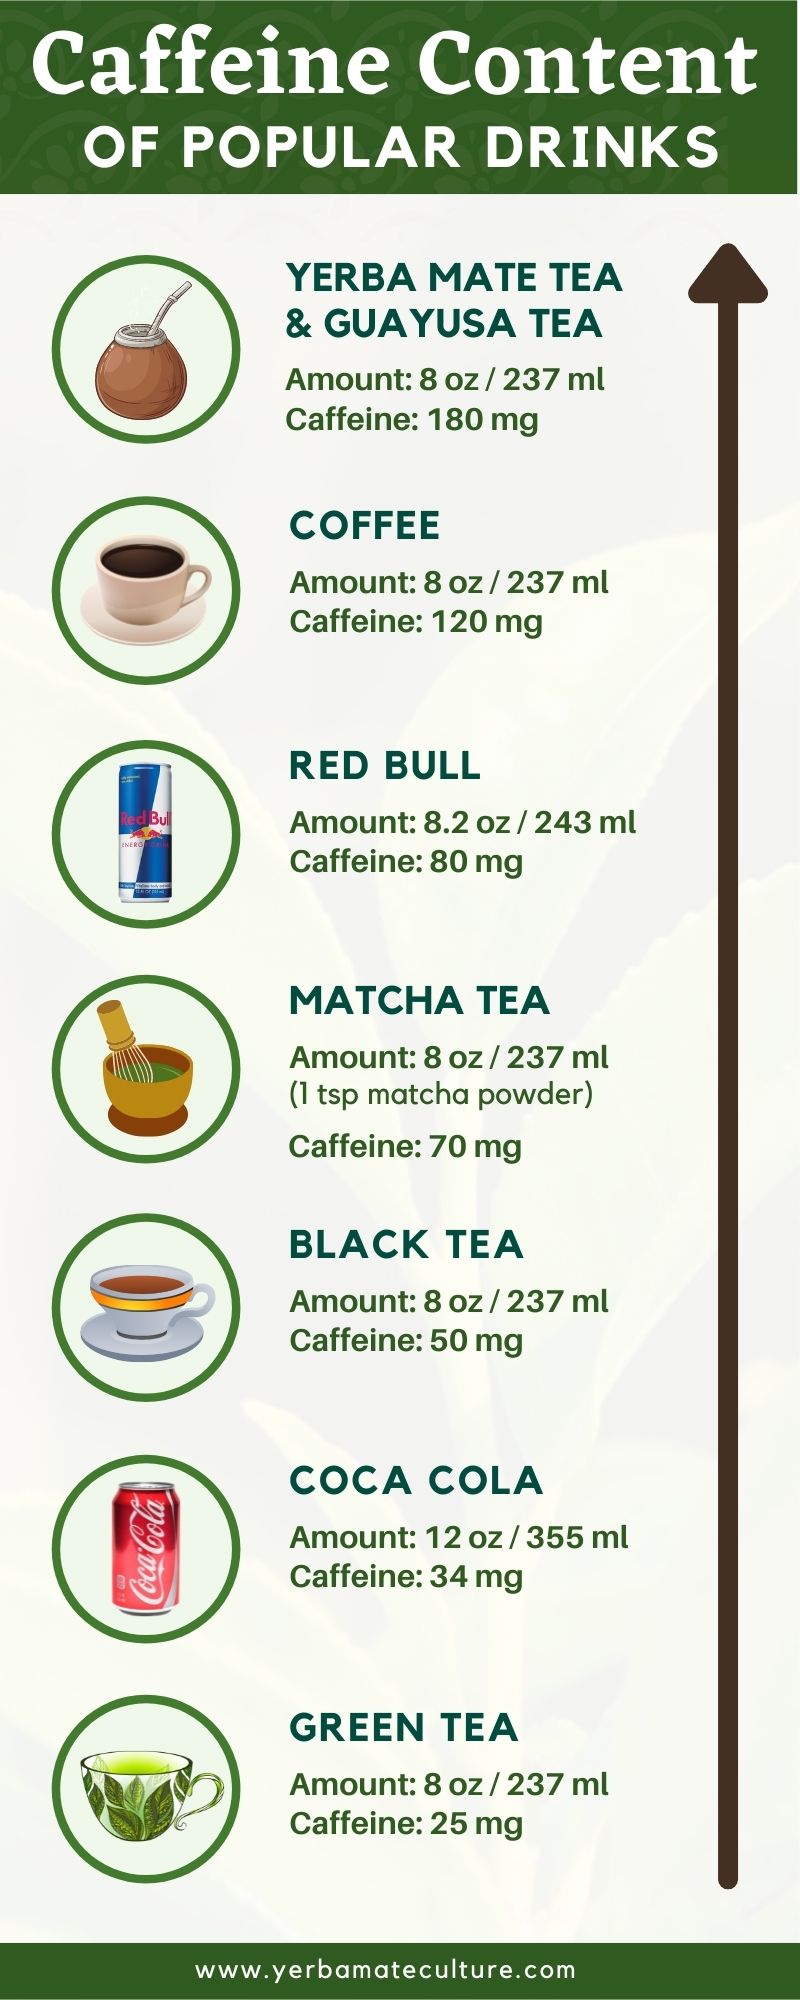 caffeine content of teas and other beverages infographic